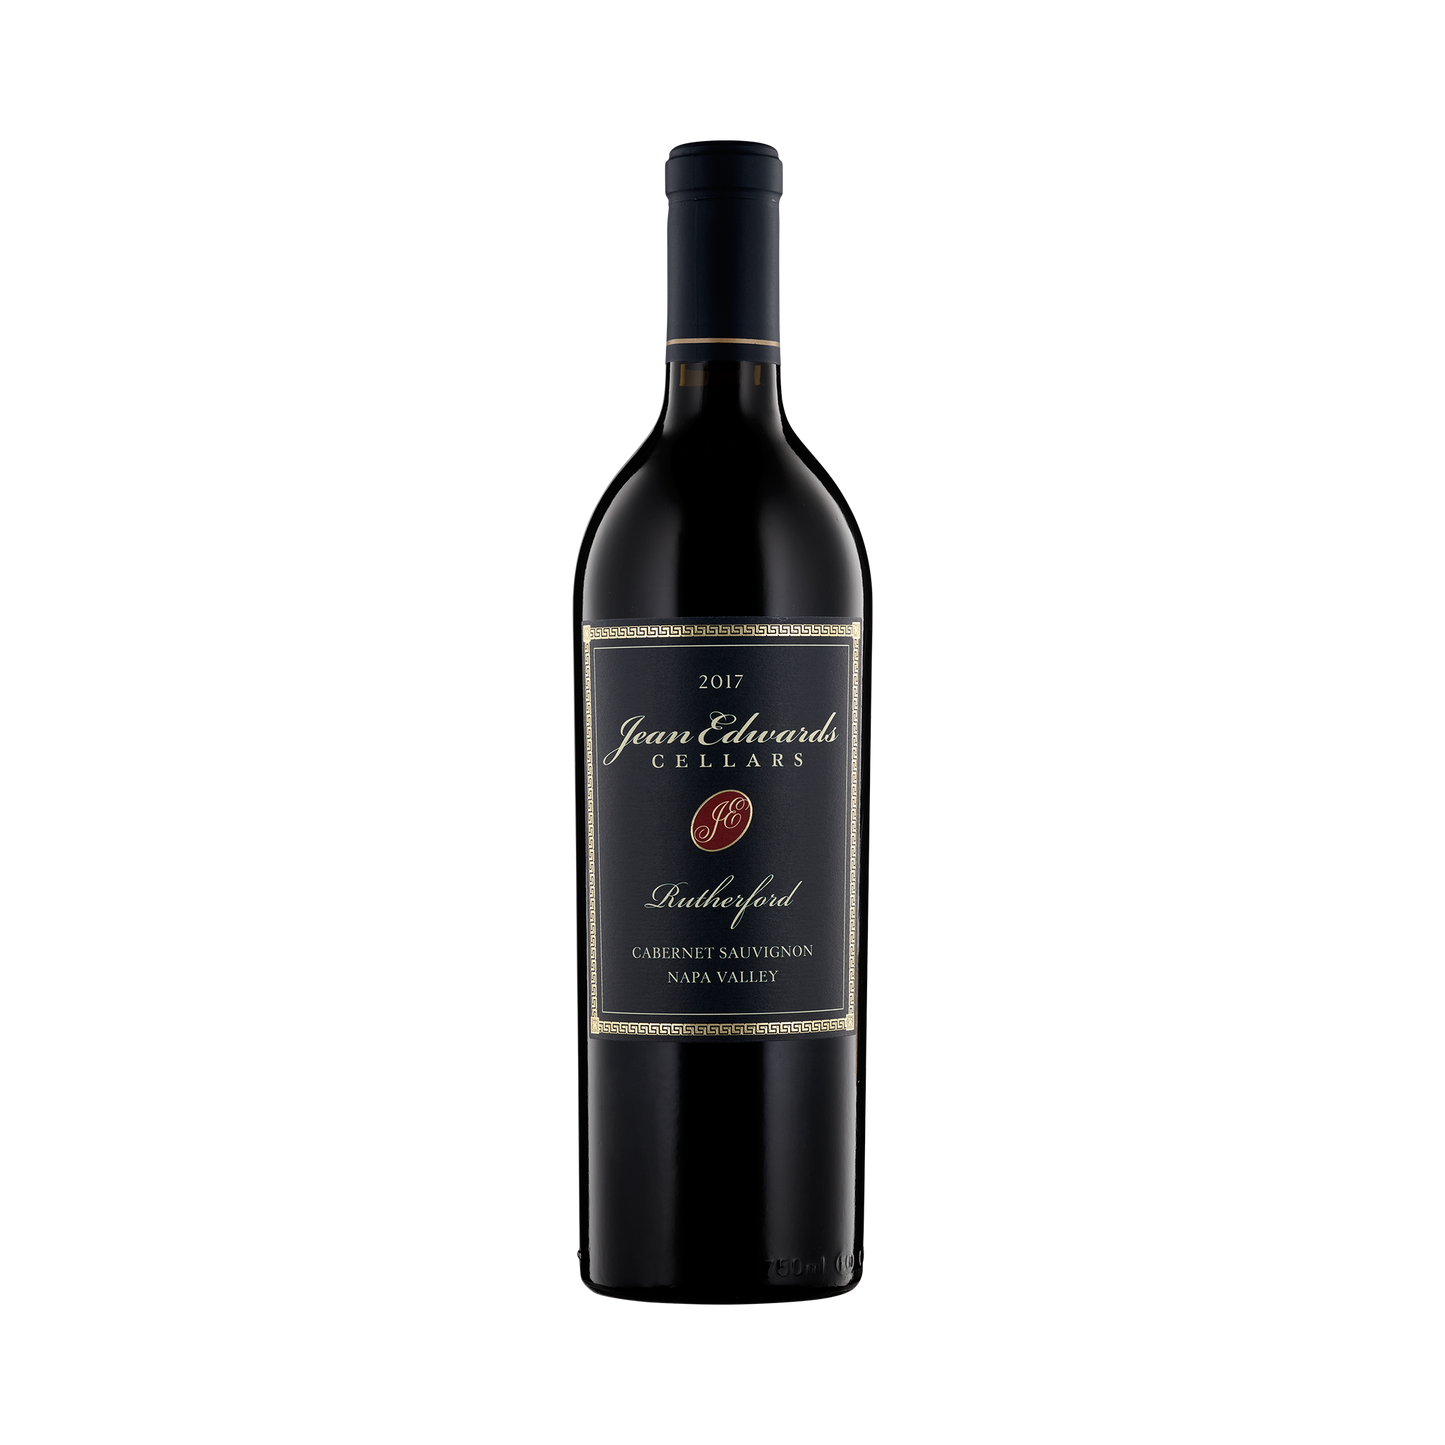 A bottle of Jean Edwards Cellars 2017 Cabernet Sauvignon Rutherford